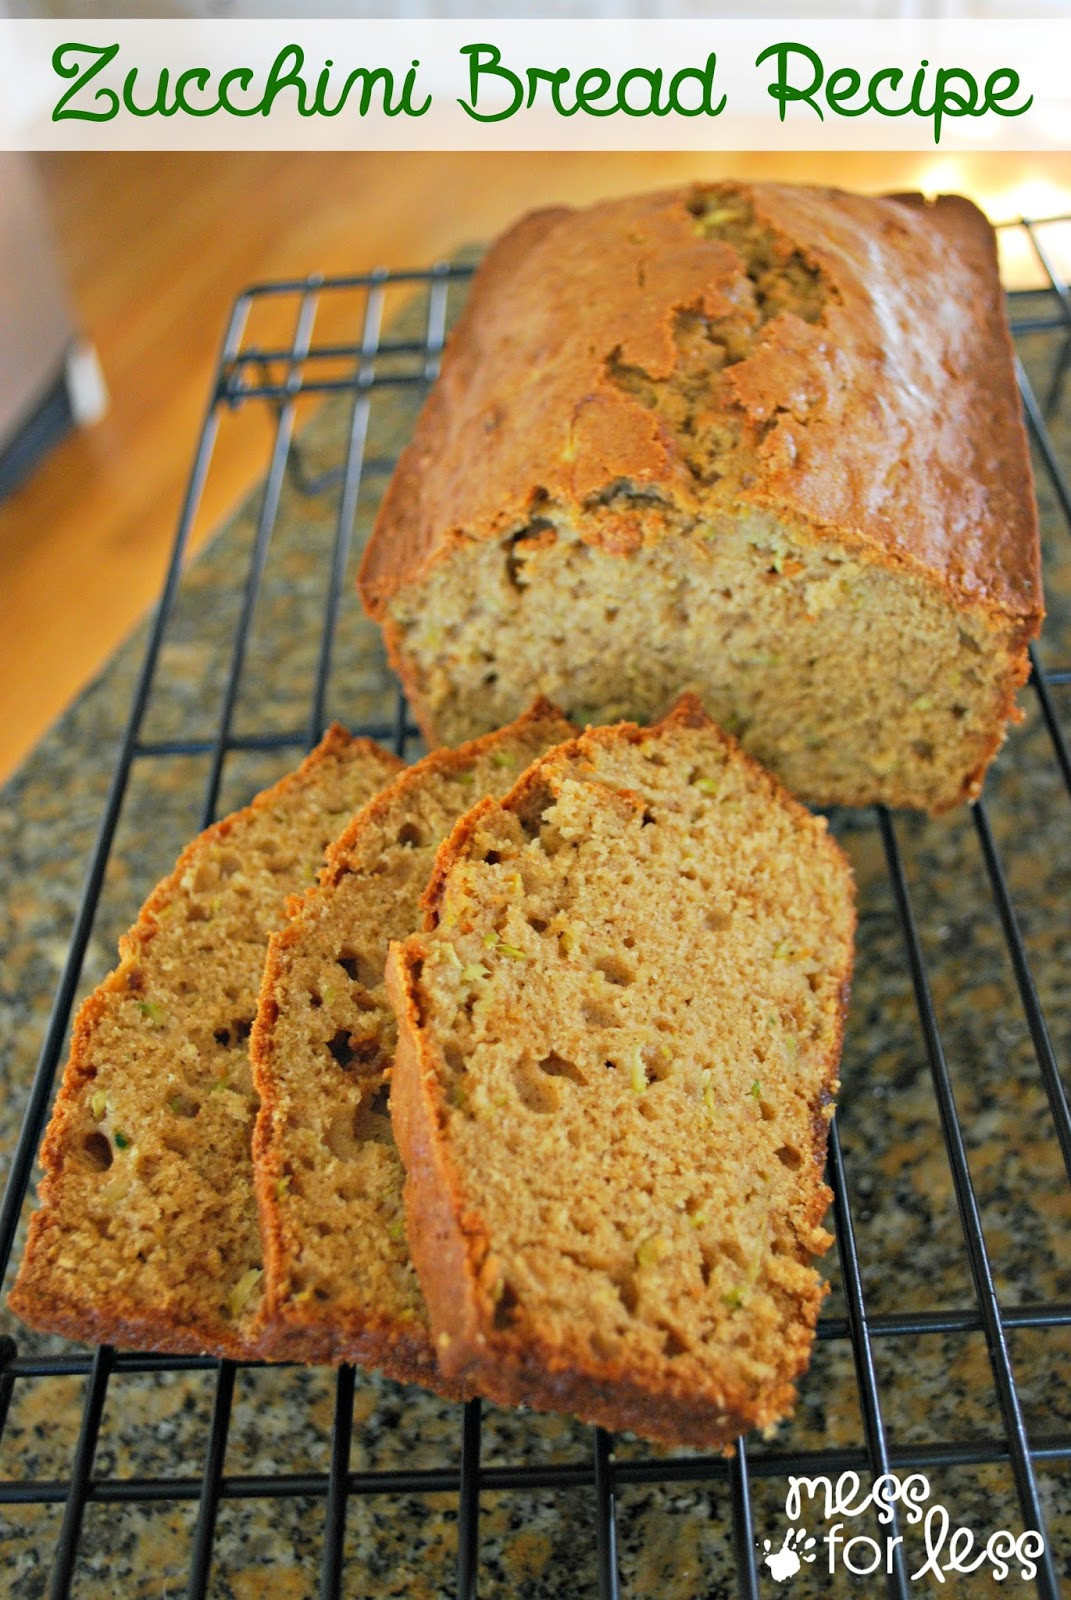 Zucchini Bread Recipe Healthy
 Treat Yourself to a Savory Bread Recipe and a few Sweet